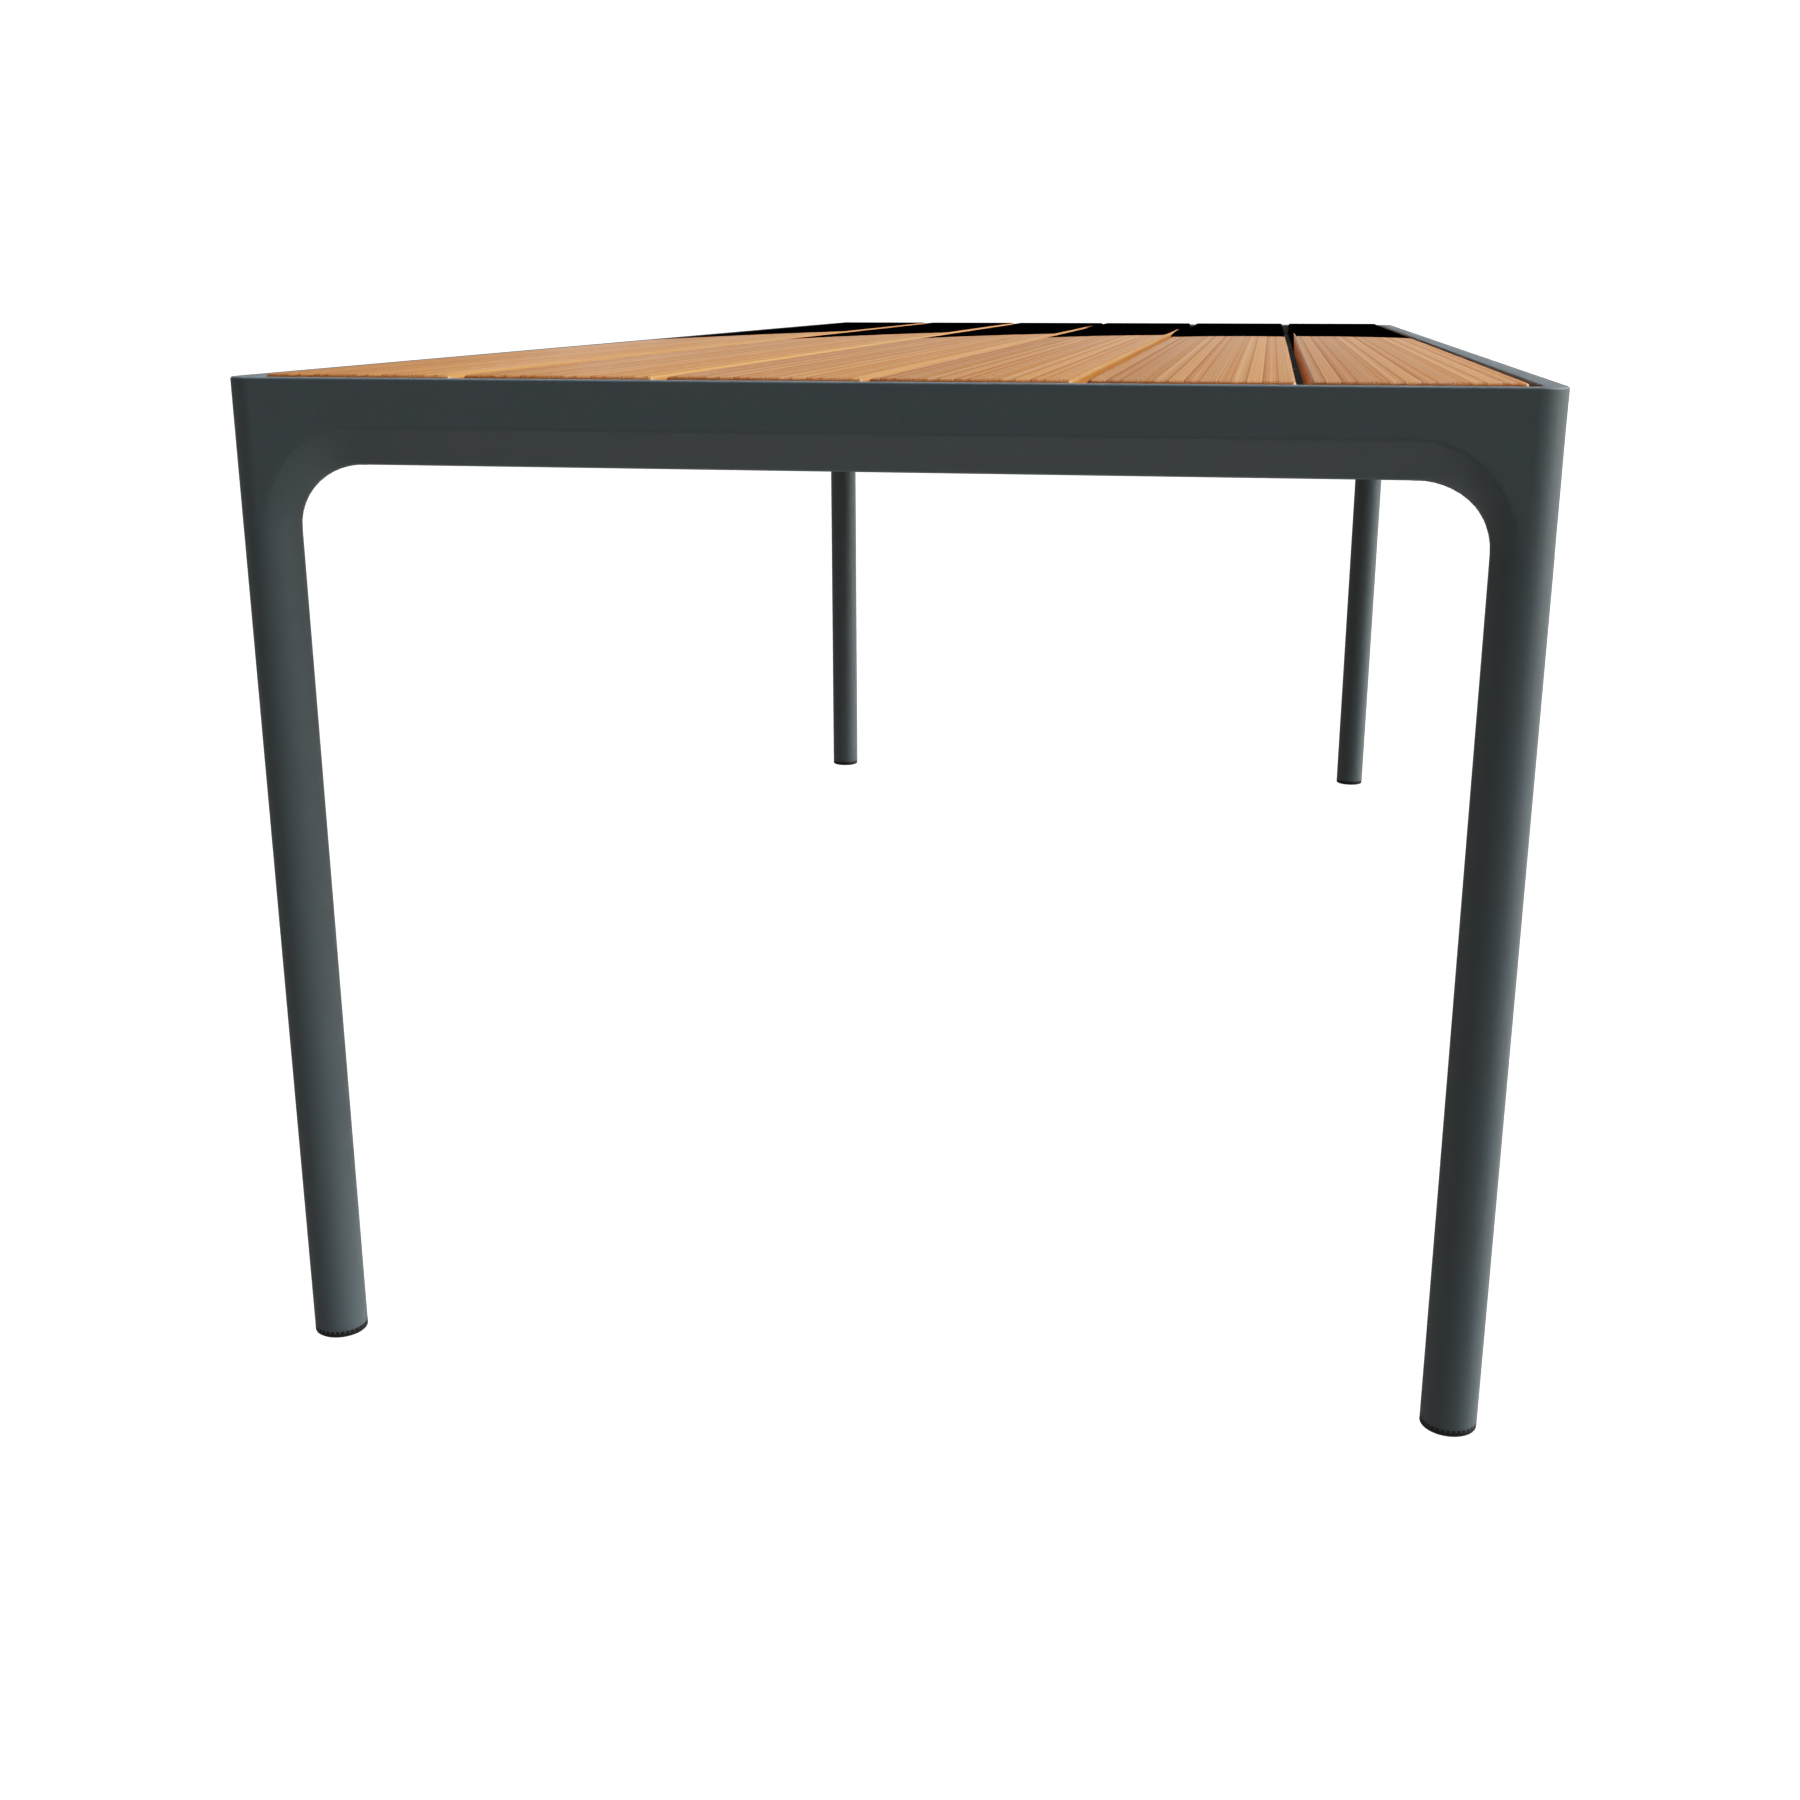 Dining Table Four 210x90 cm 12403-0326 in Grau